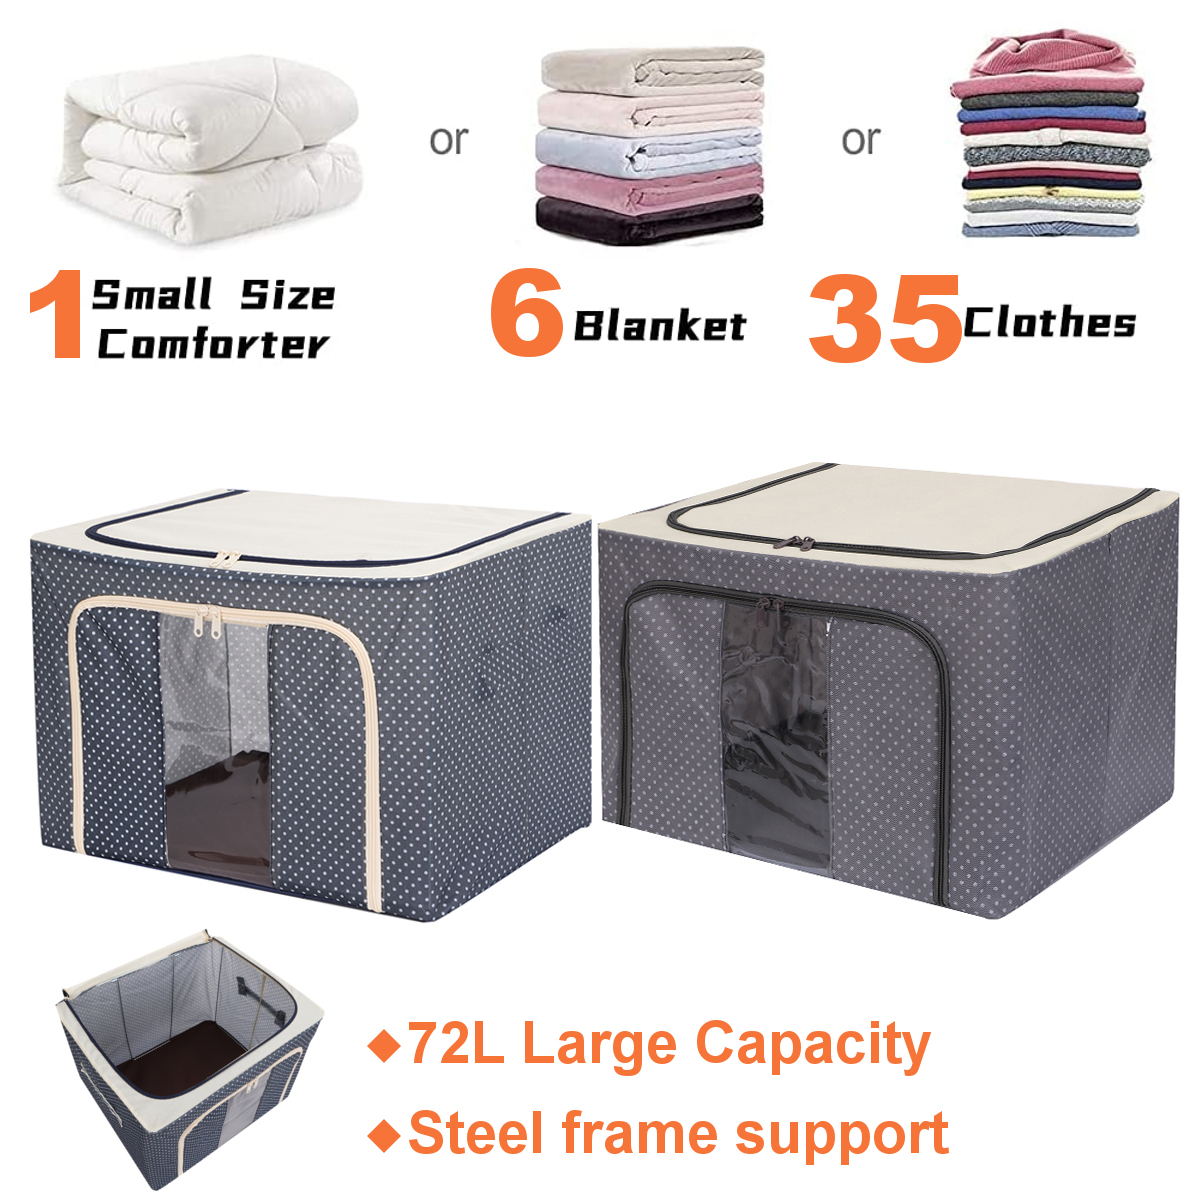 Storage-Bags-72L-Large-Blanket-Clothes-Organization-Containers-Bedding-Comforters-Foldable-Organizer-1914855-2